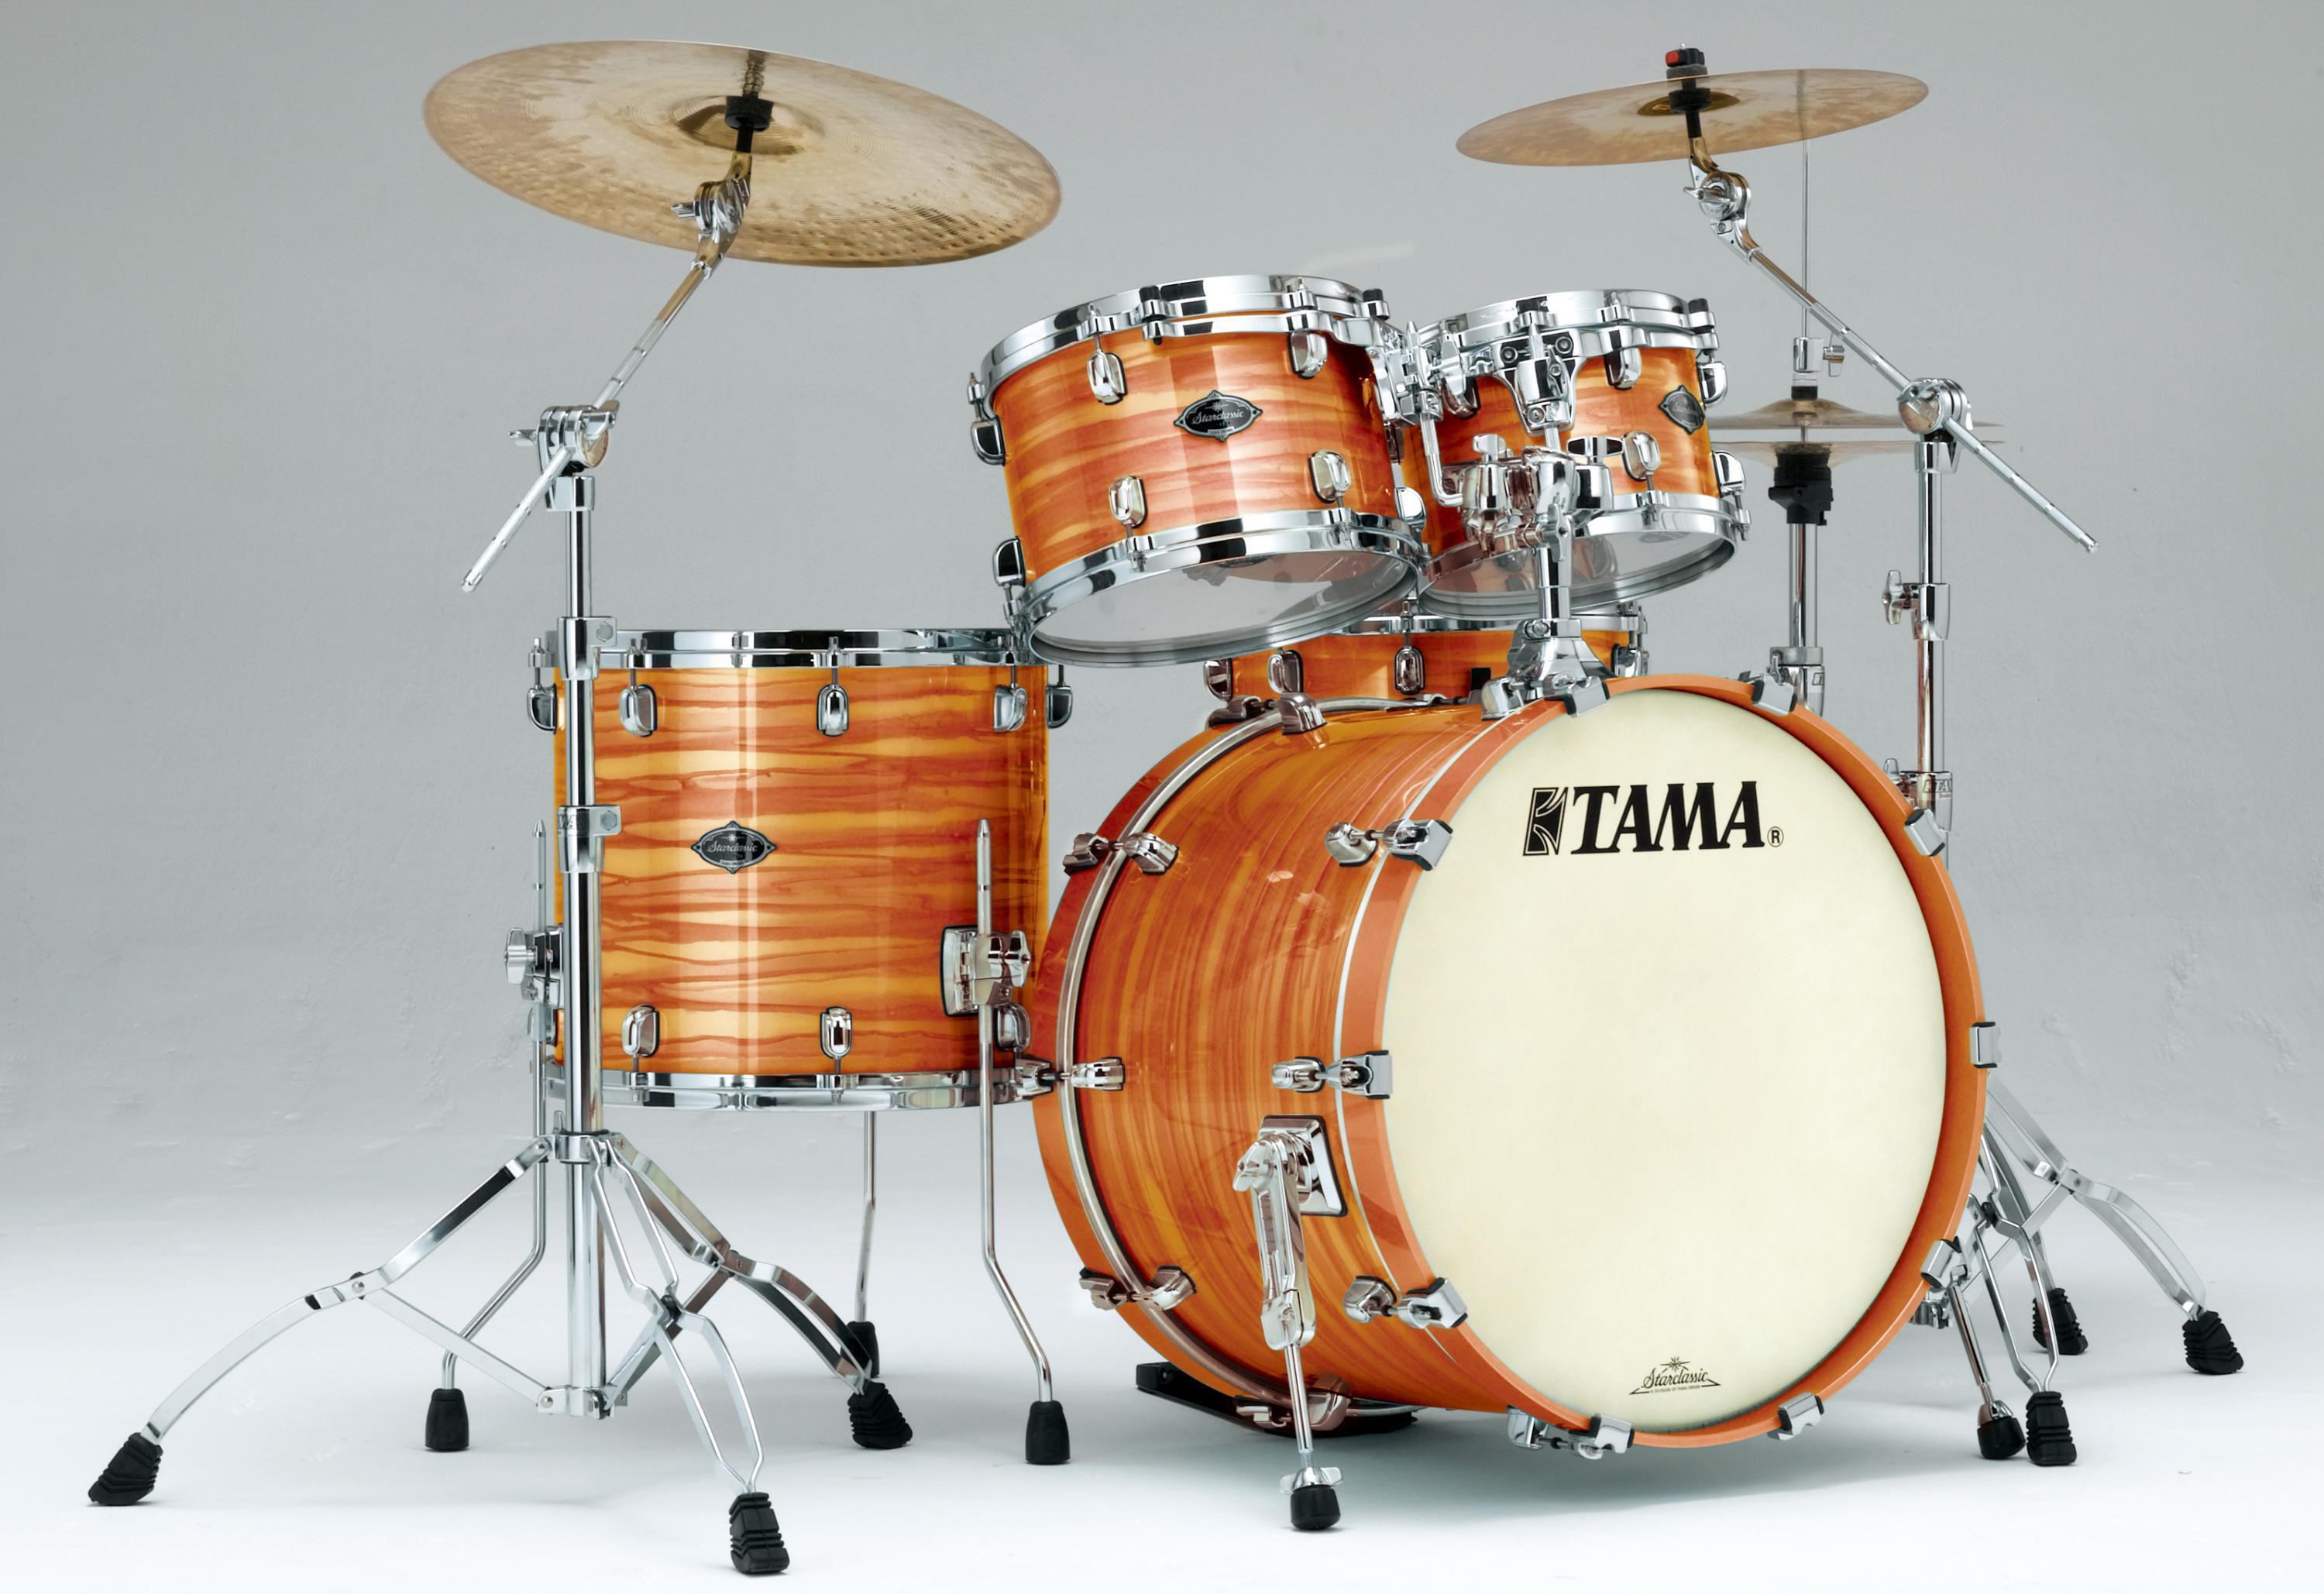 Tama Starclassic Performer B/B - Lacquered Orange Oyster | Sweetwater